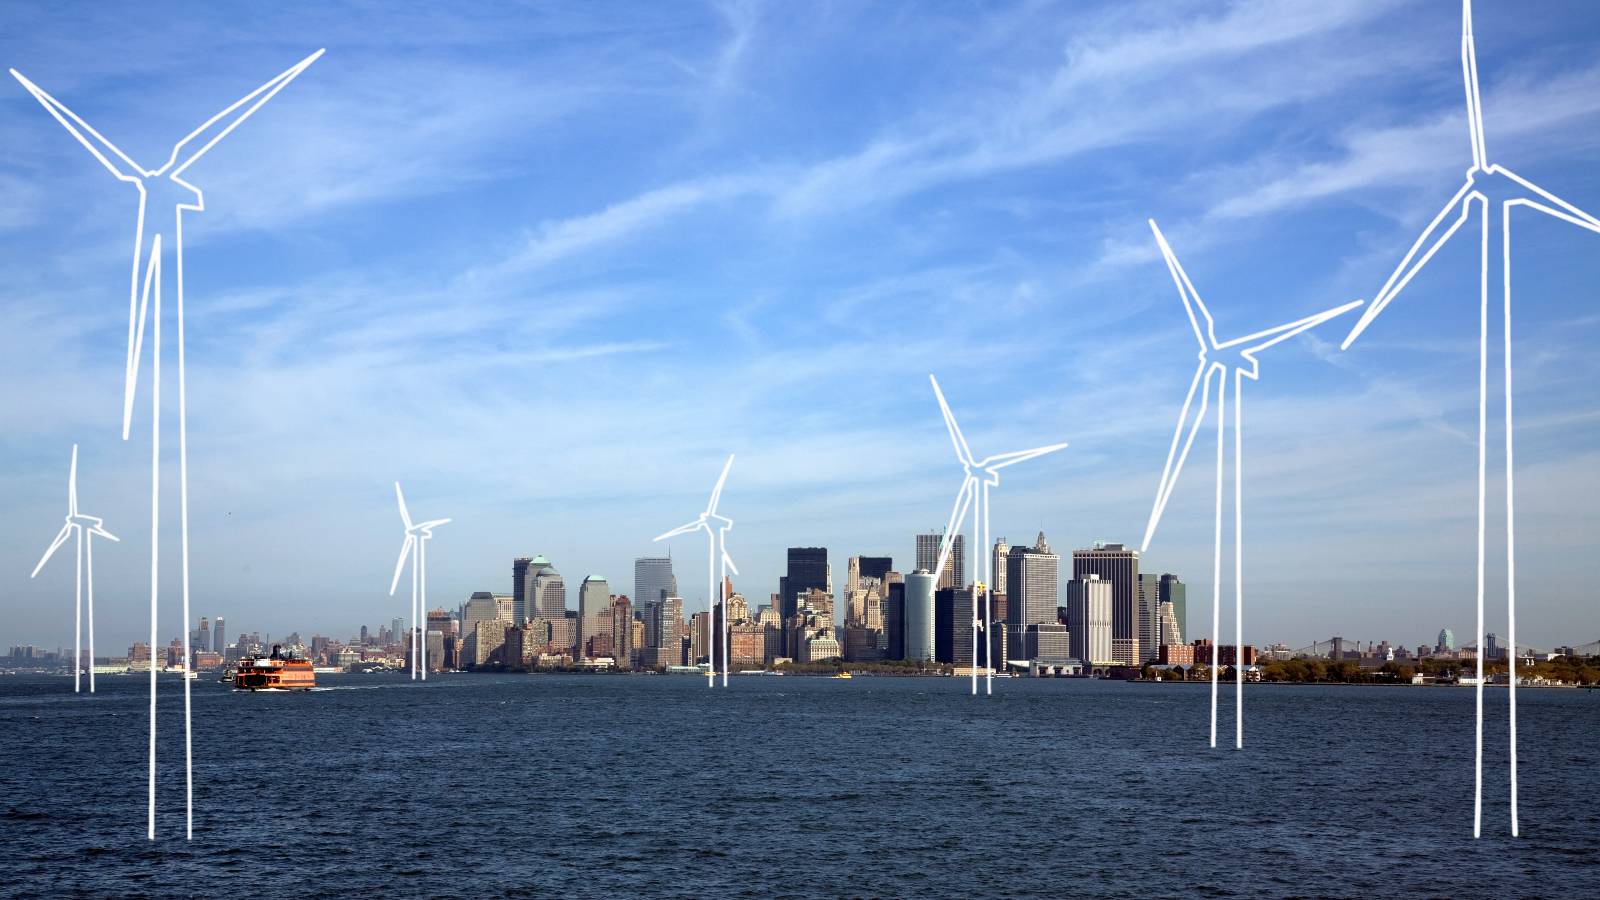 Illustration of offshore wind farm in the New York Harbor.